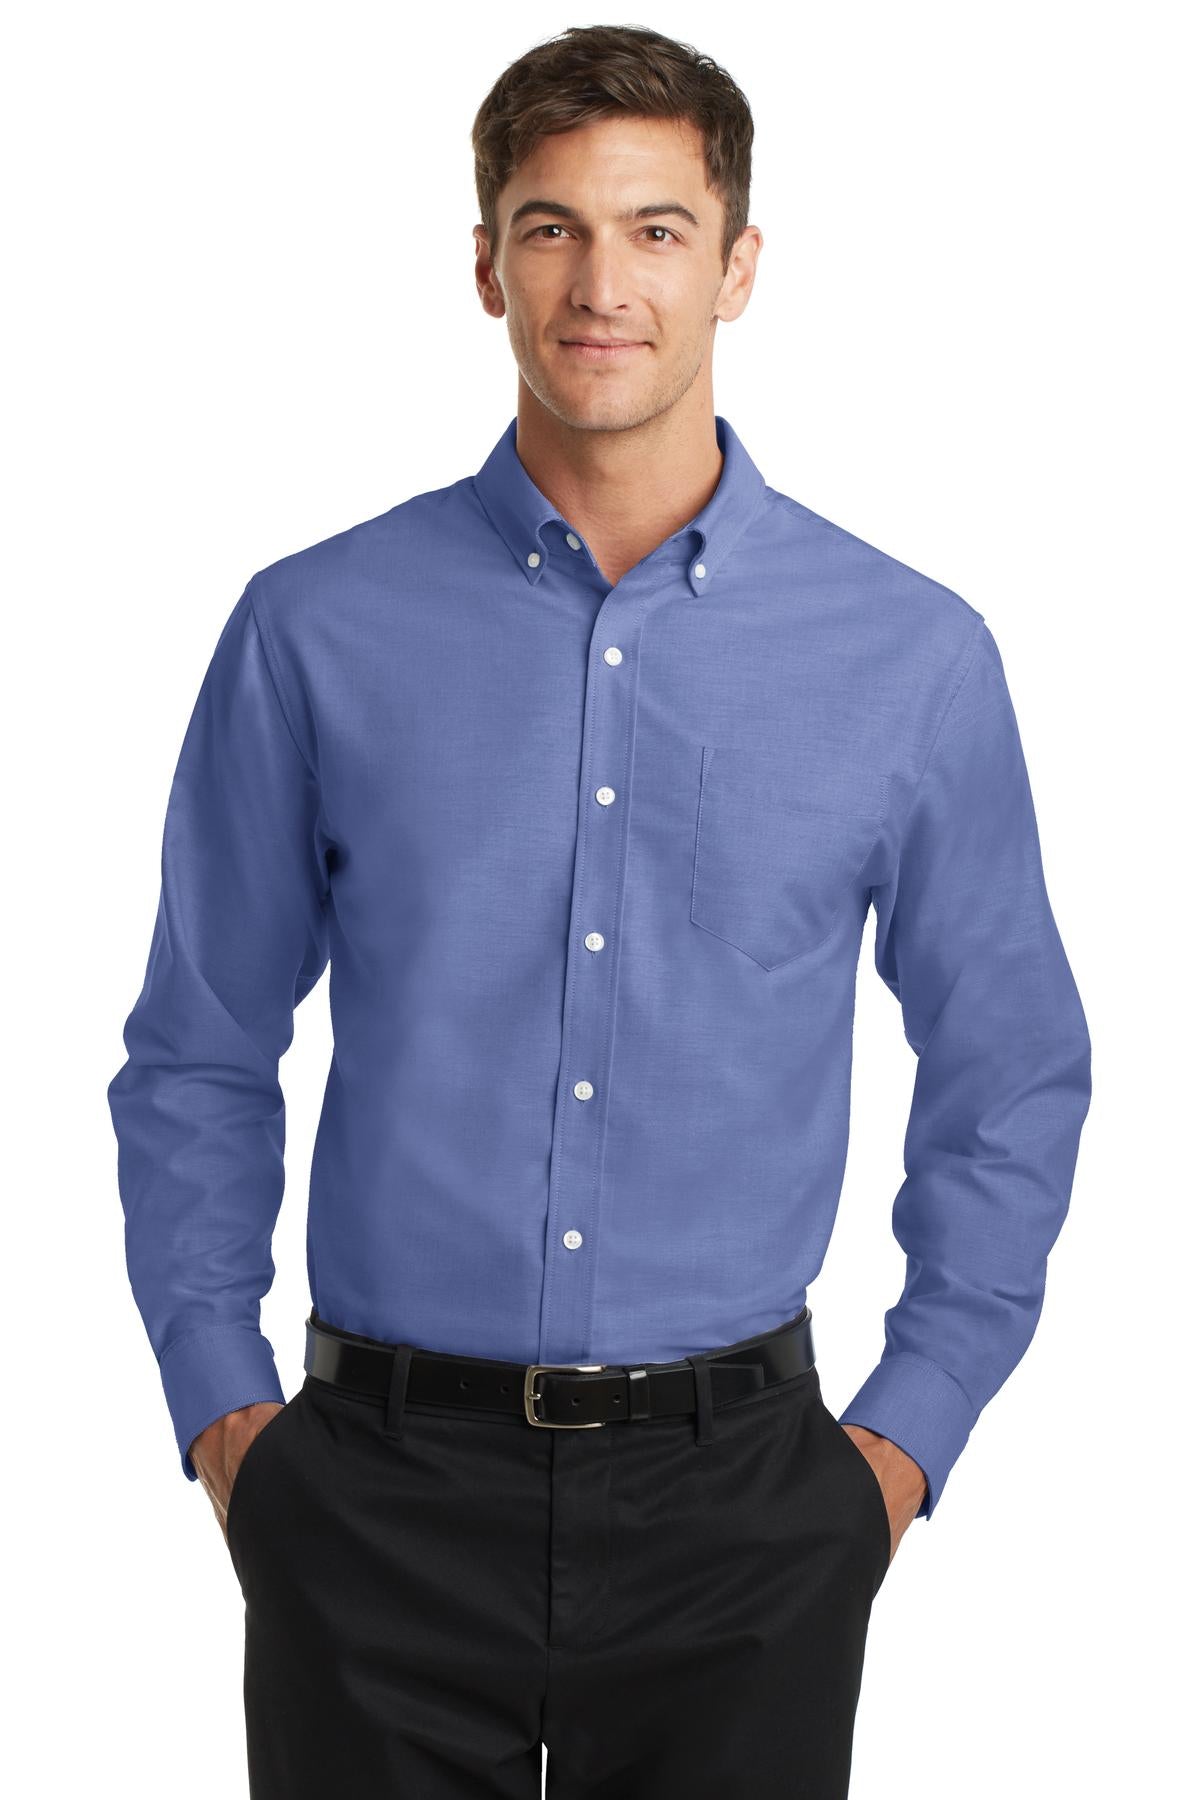 Woven Shirts Navy Port Authority